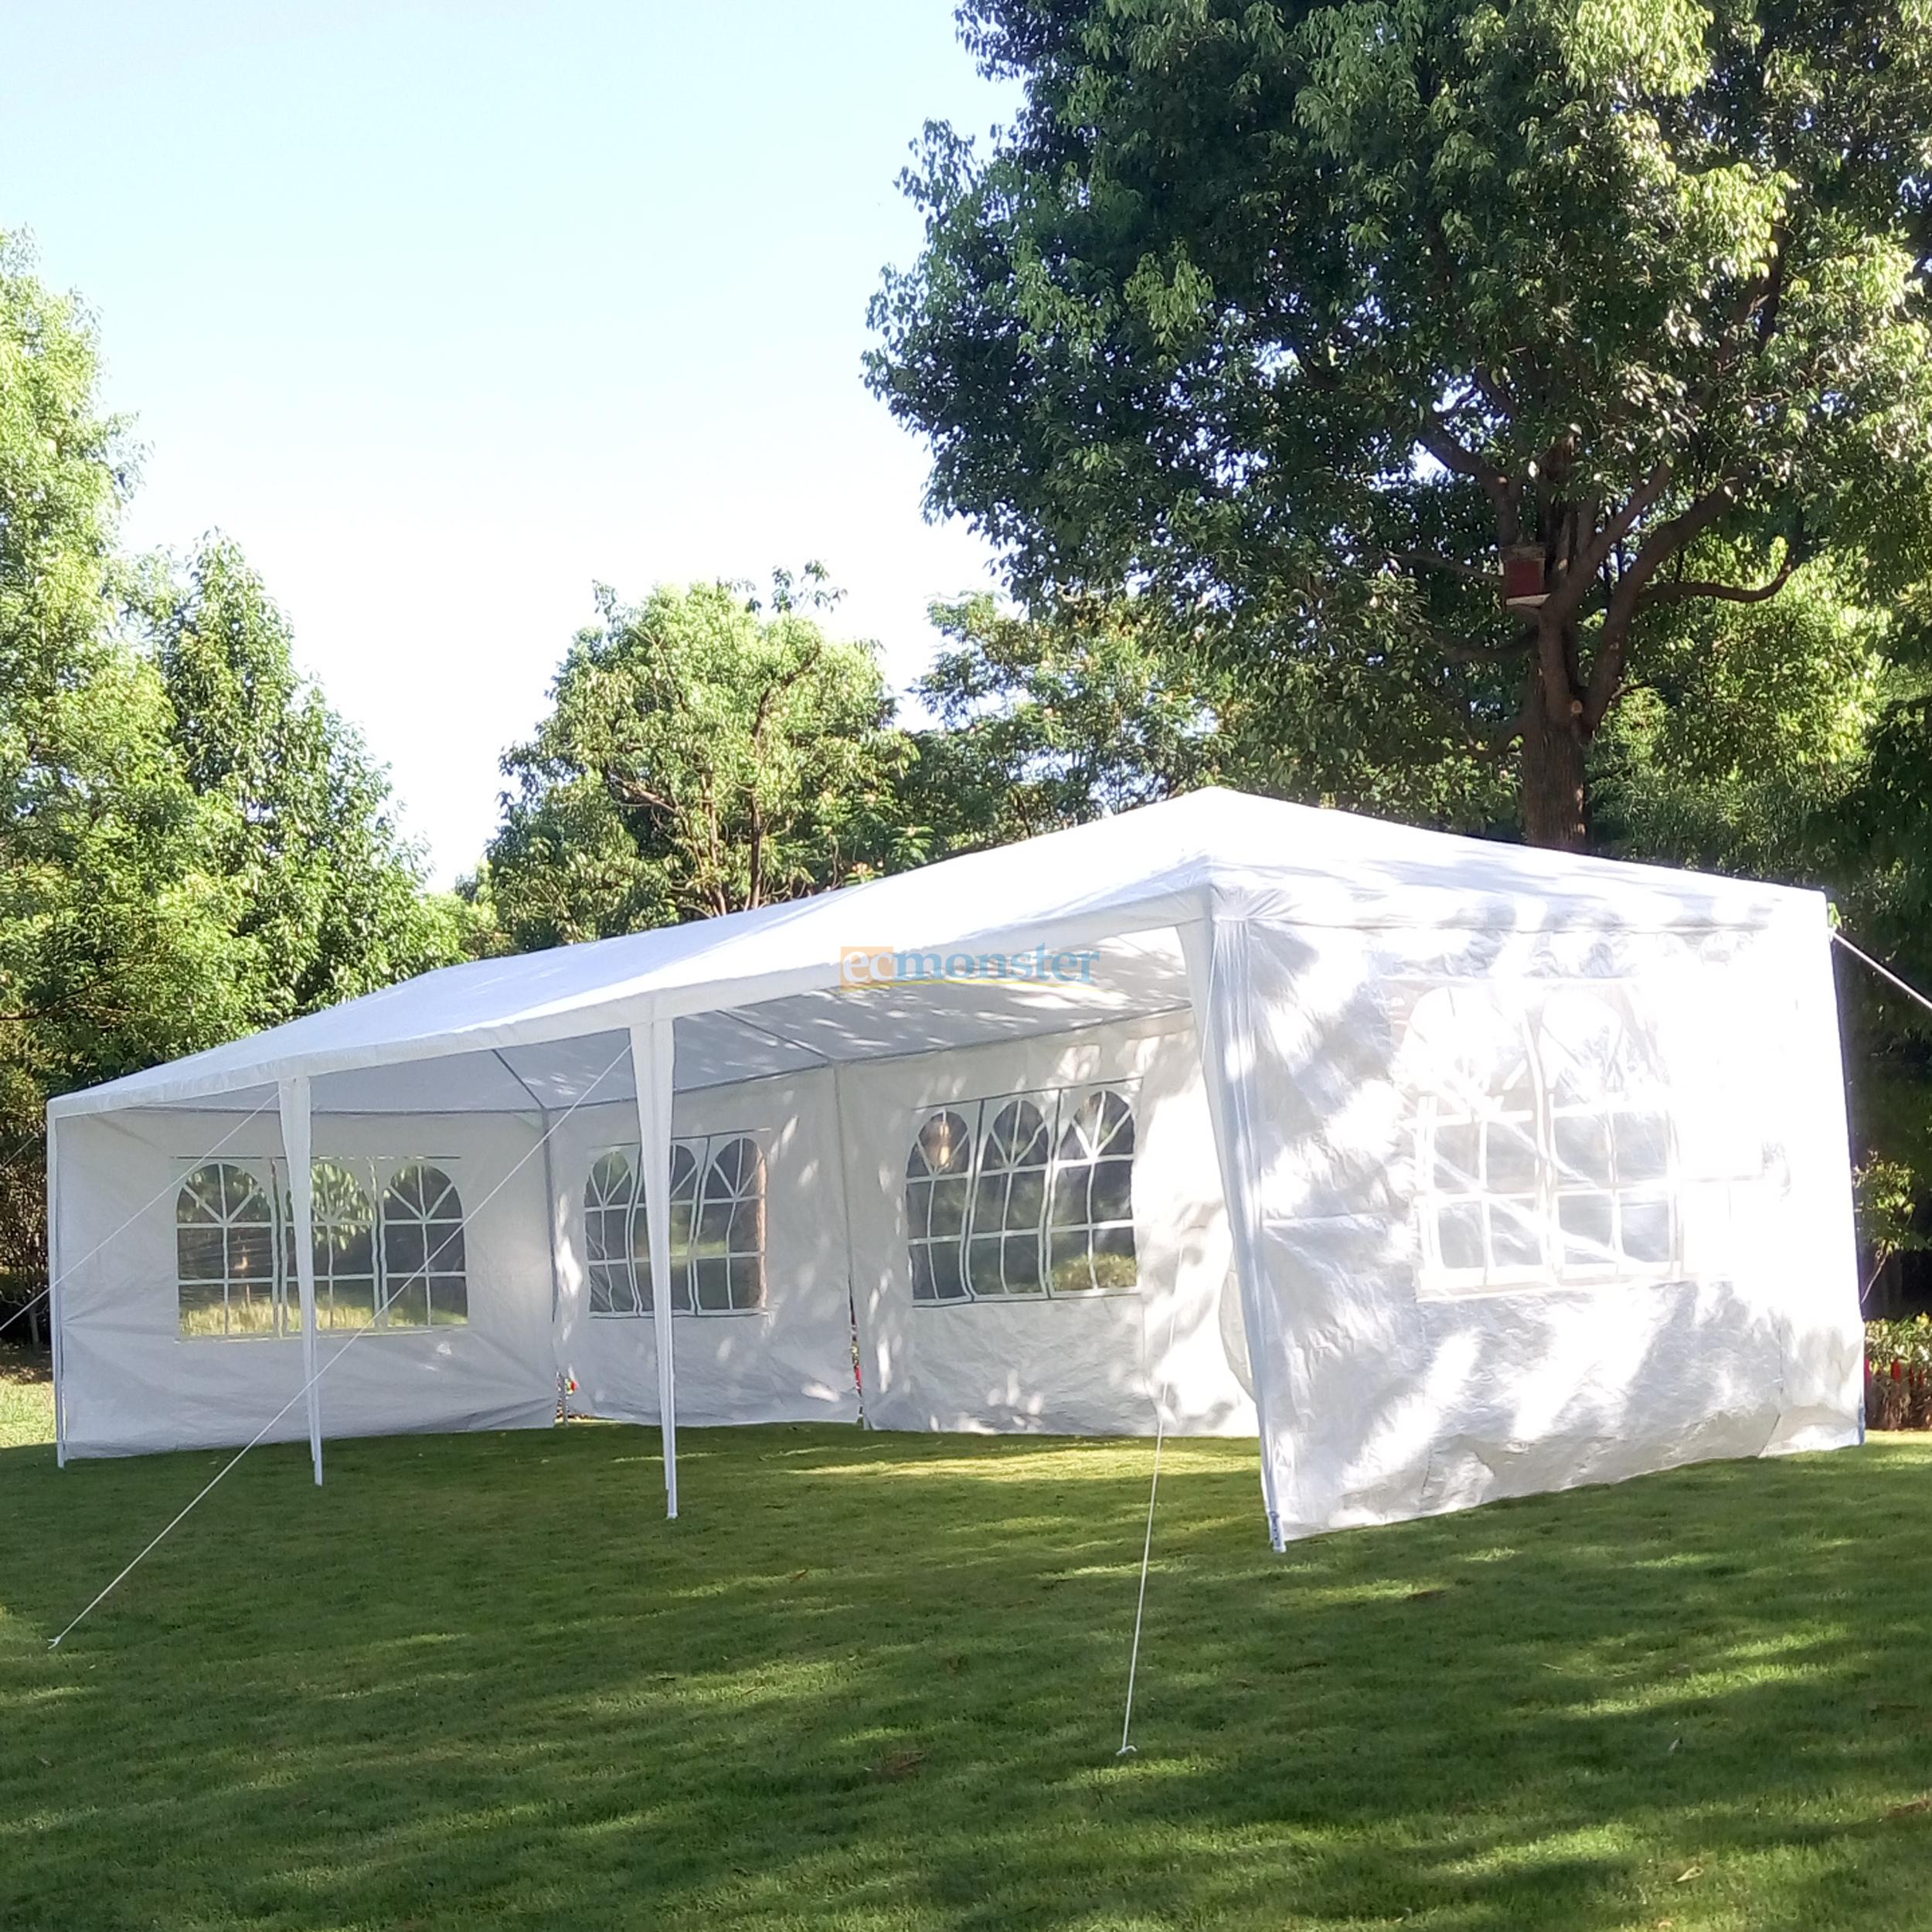 Marquee outdoor party pavilion instructions